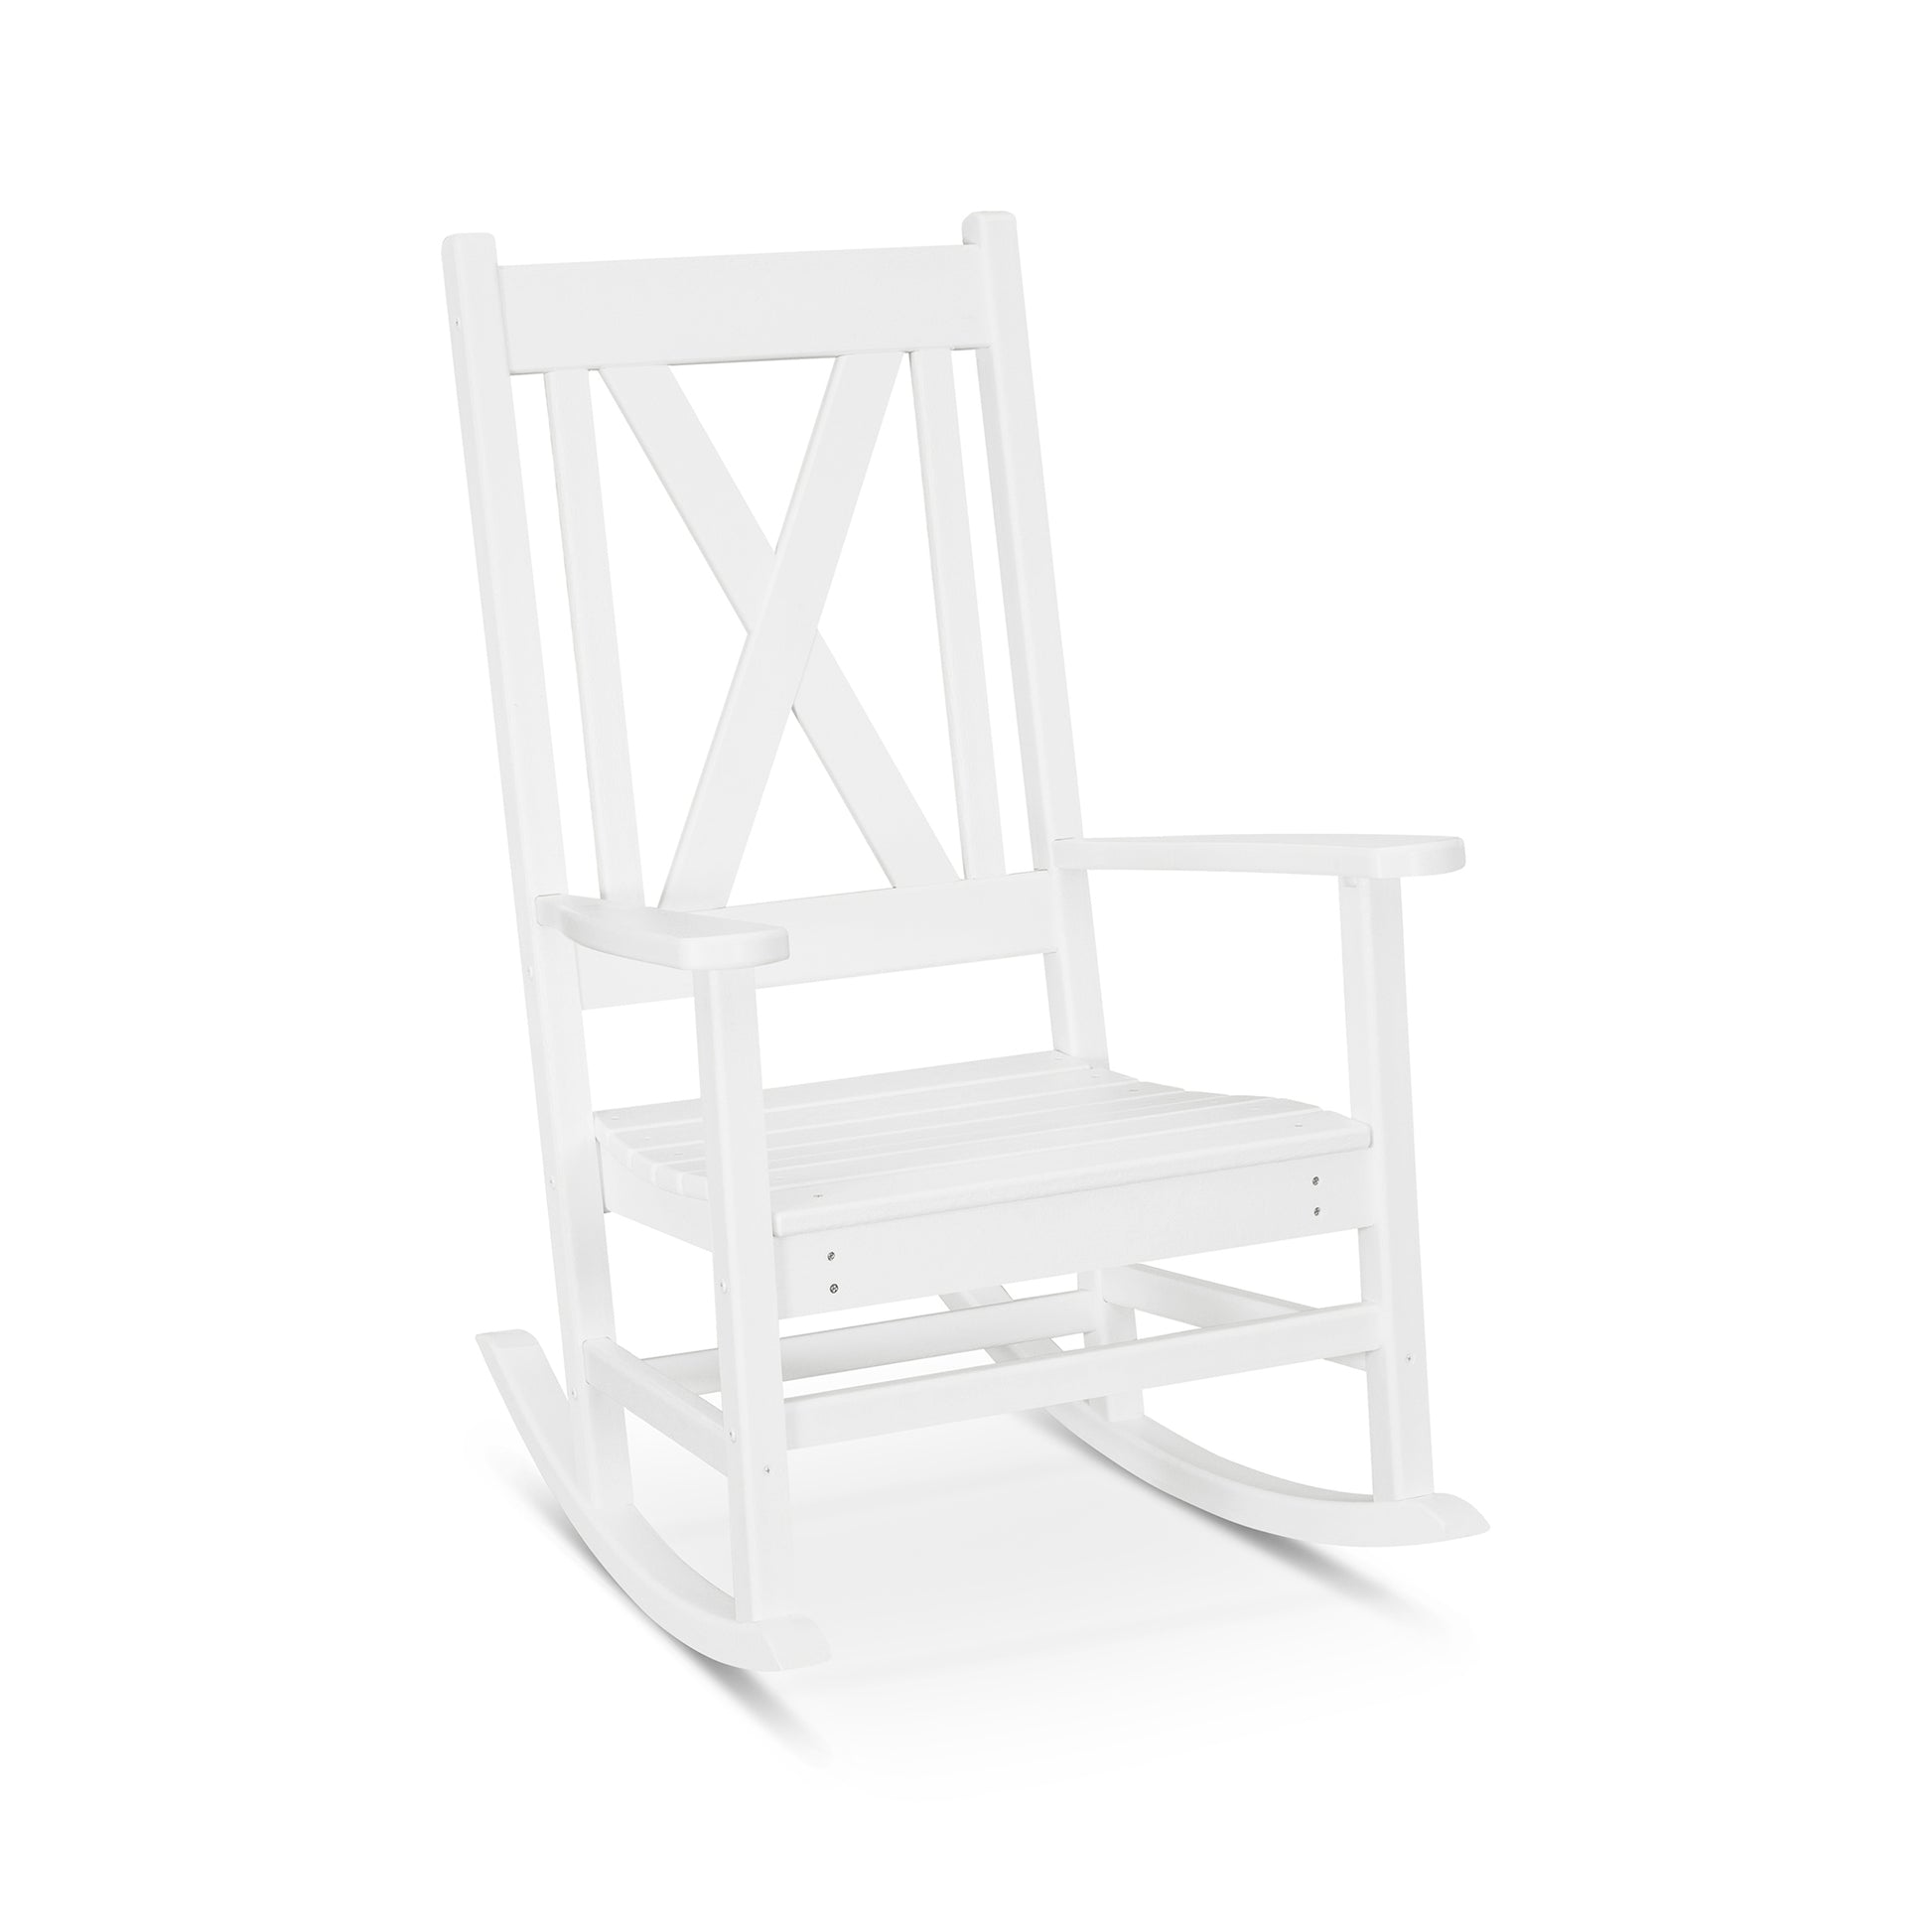 A white rocking chair on a white background.